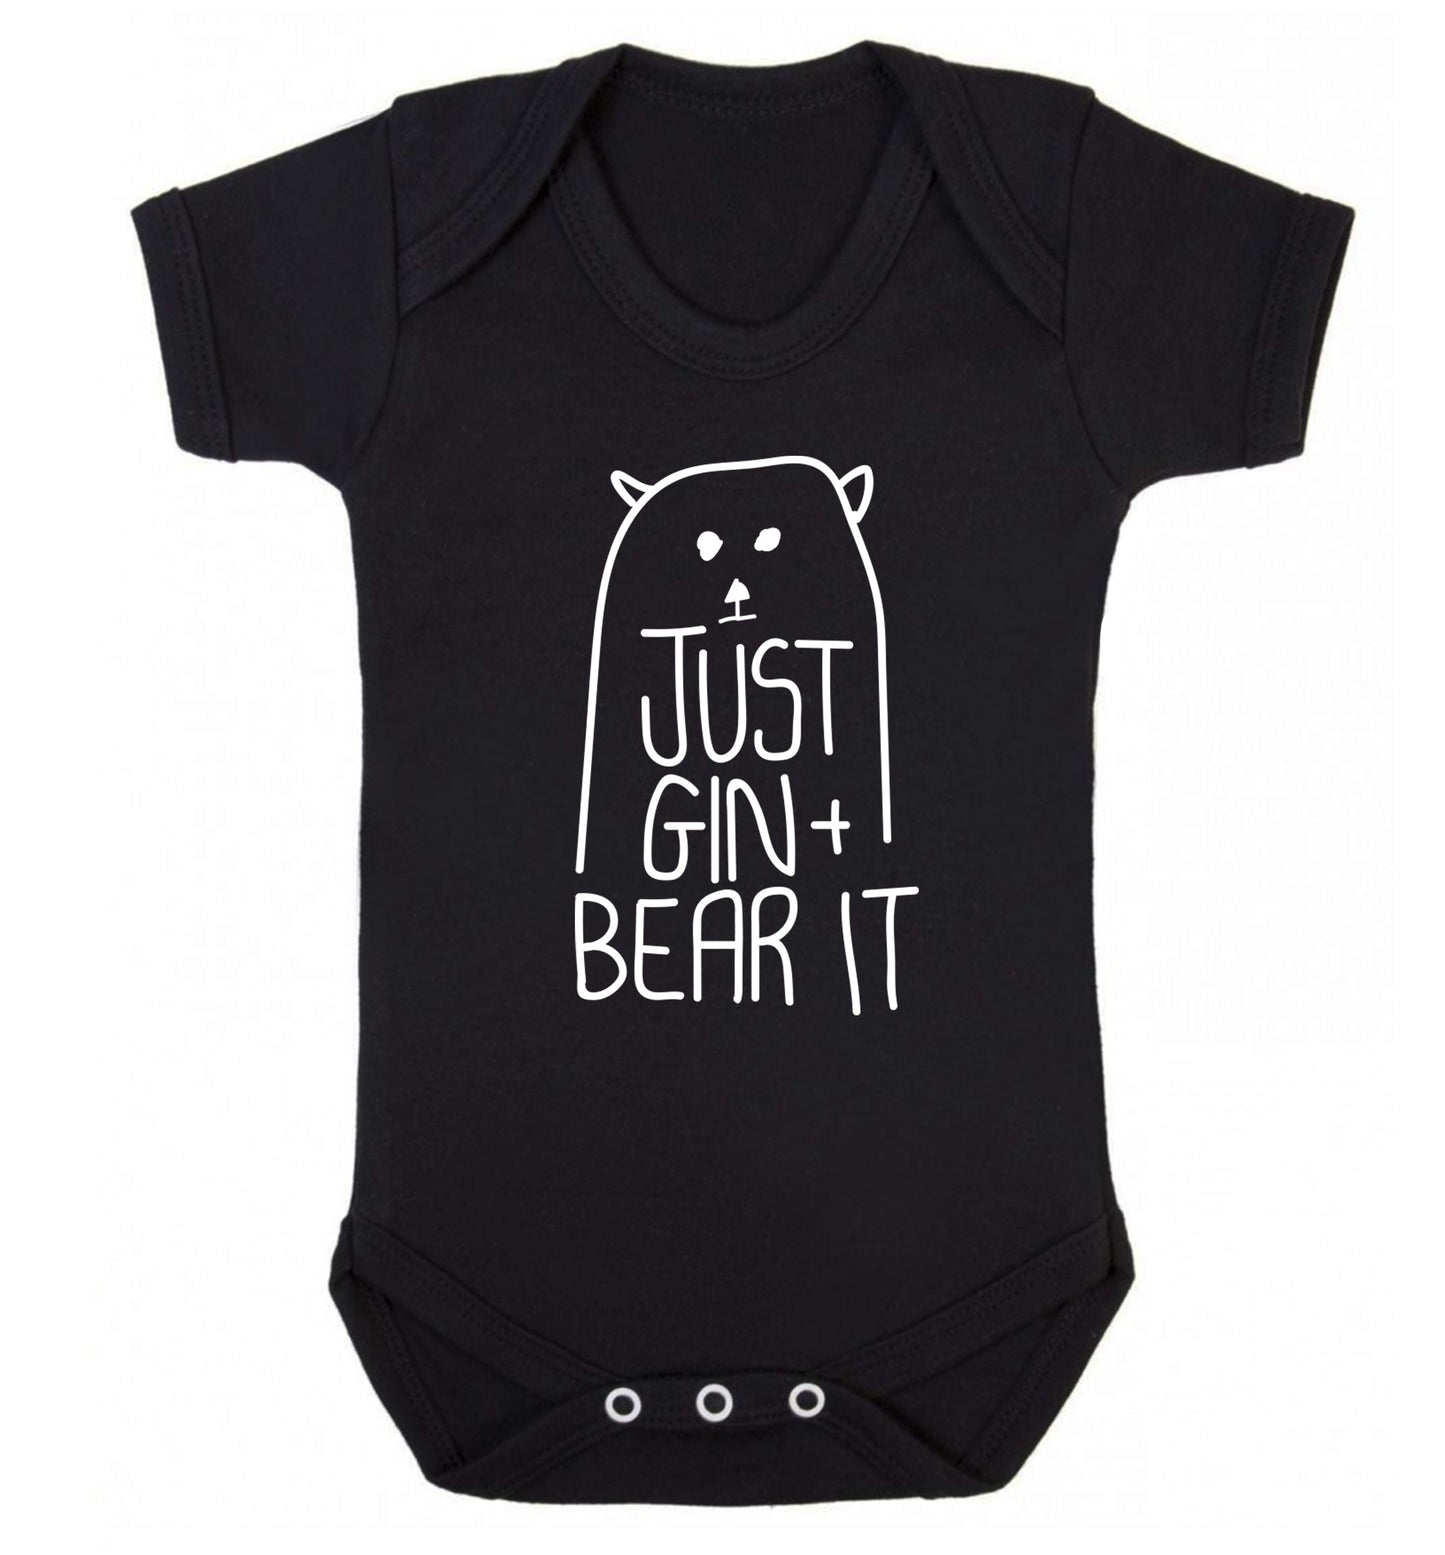 Just gin and bear it Baby Vest black 18-24 months